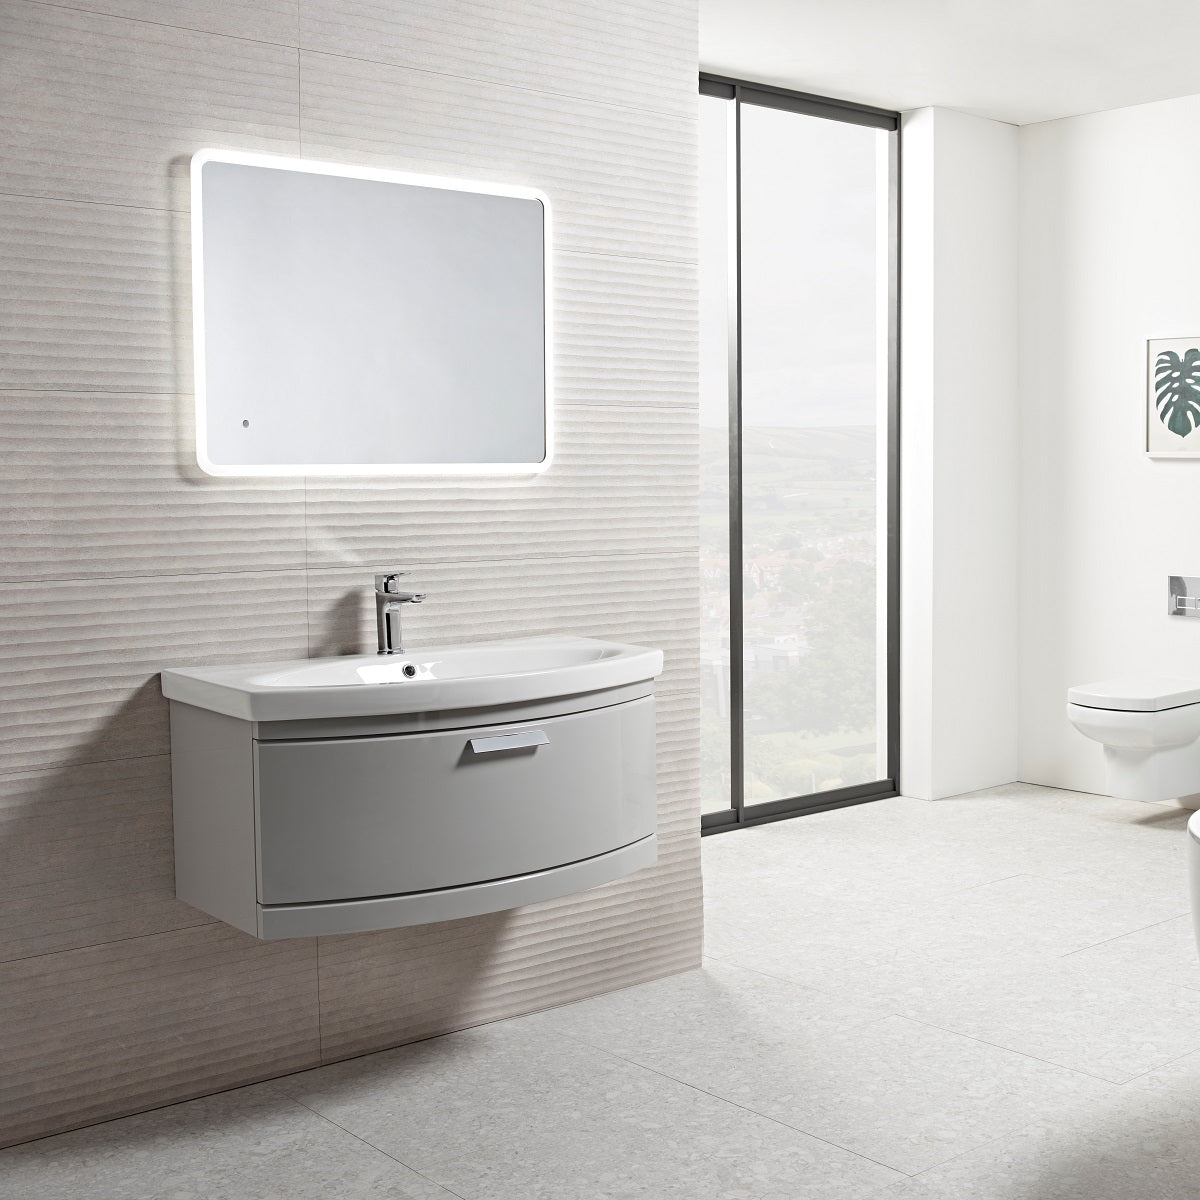 Tavistock Tempo 900mm Wall Mounted Unit &amp; Basin - Various Colours wide view showing the unit against a stone wall design underneath a light up mirror  TE900WG